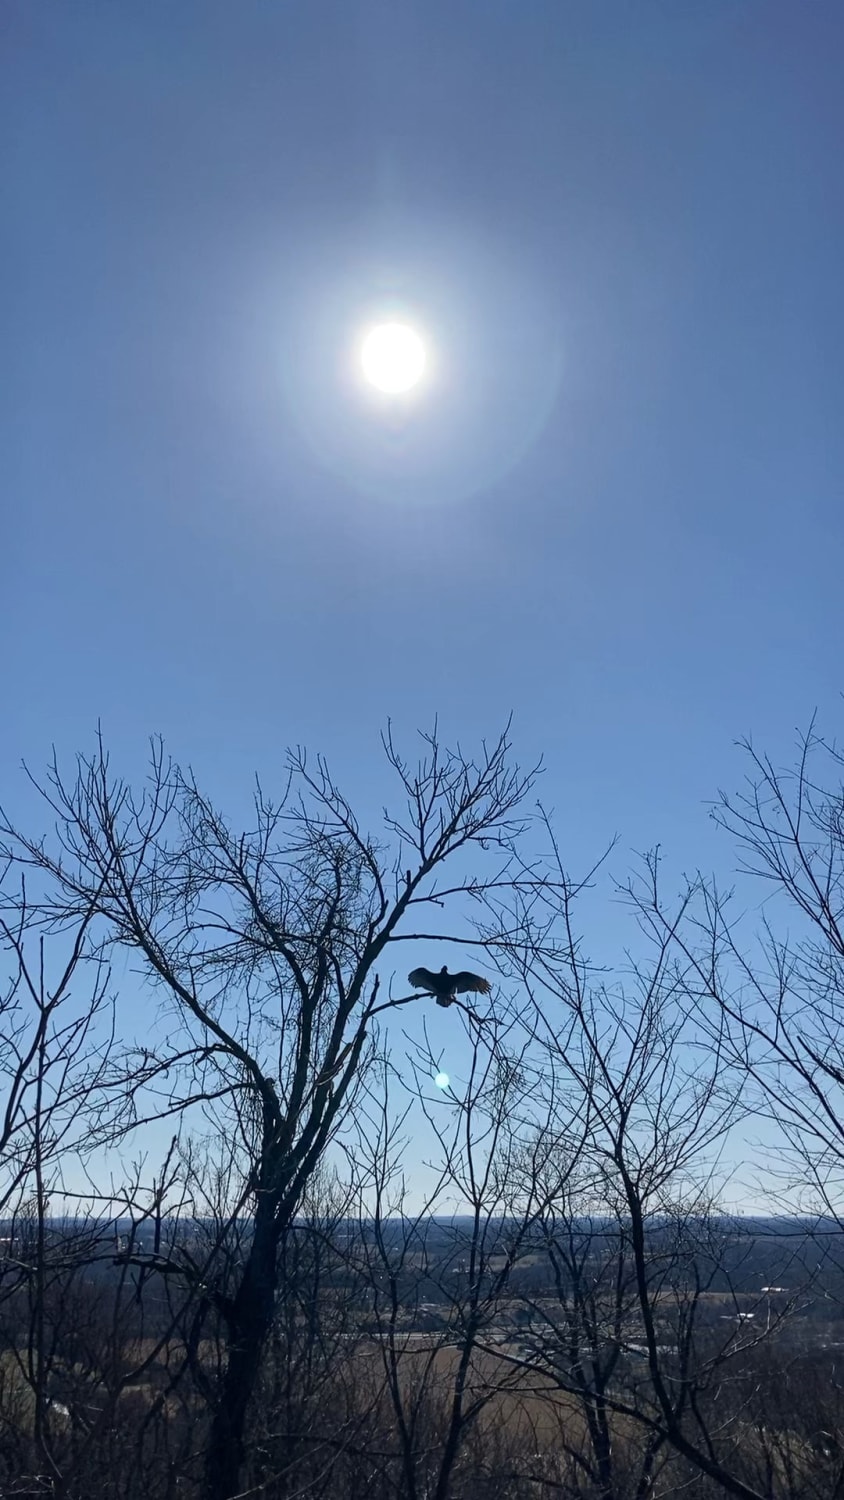 I found a solar-powered BIRD recharging its battery while hiking this weekend